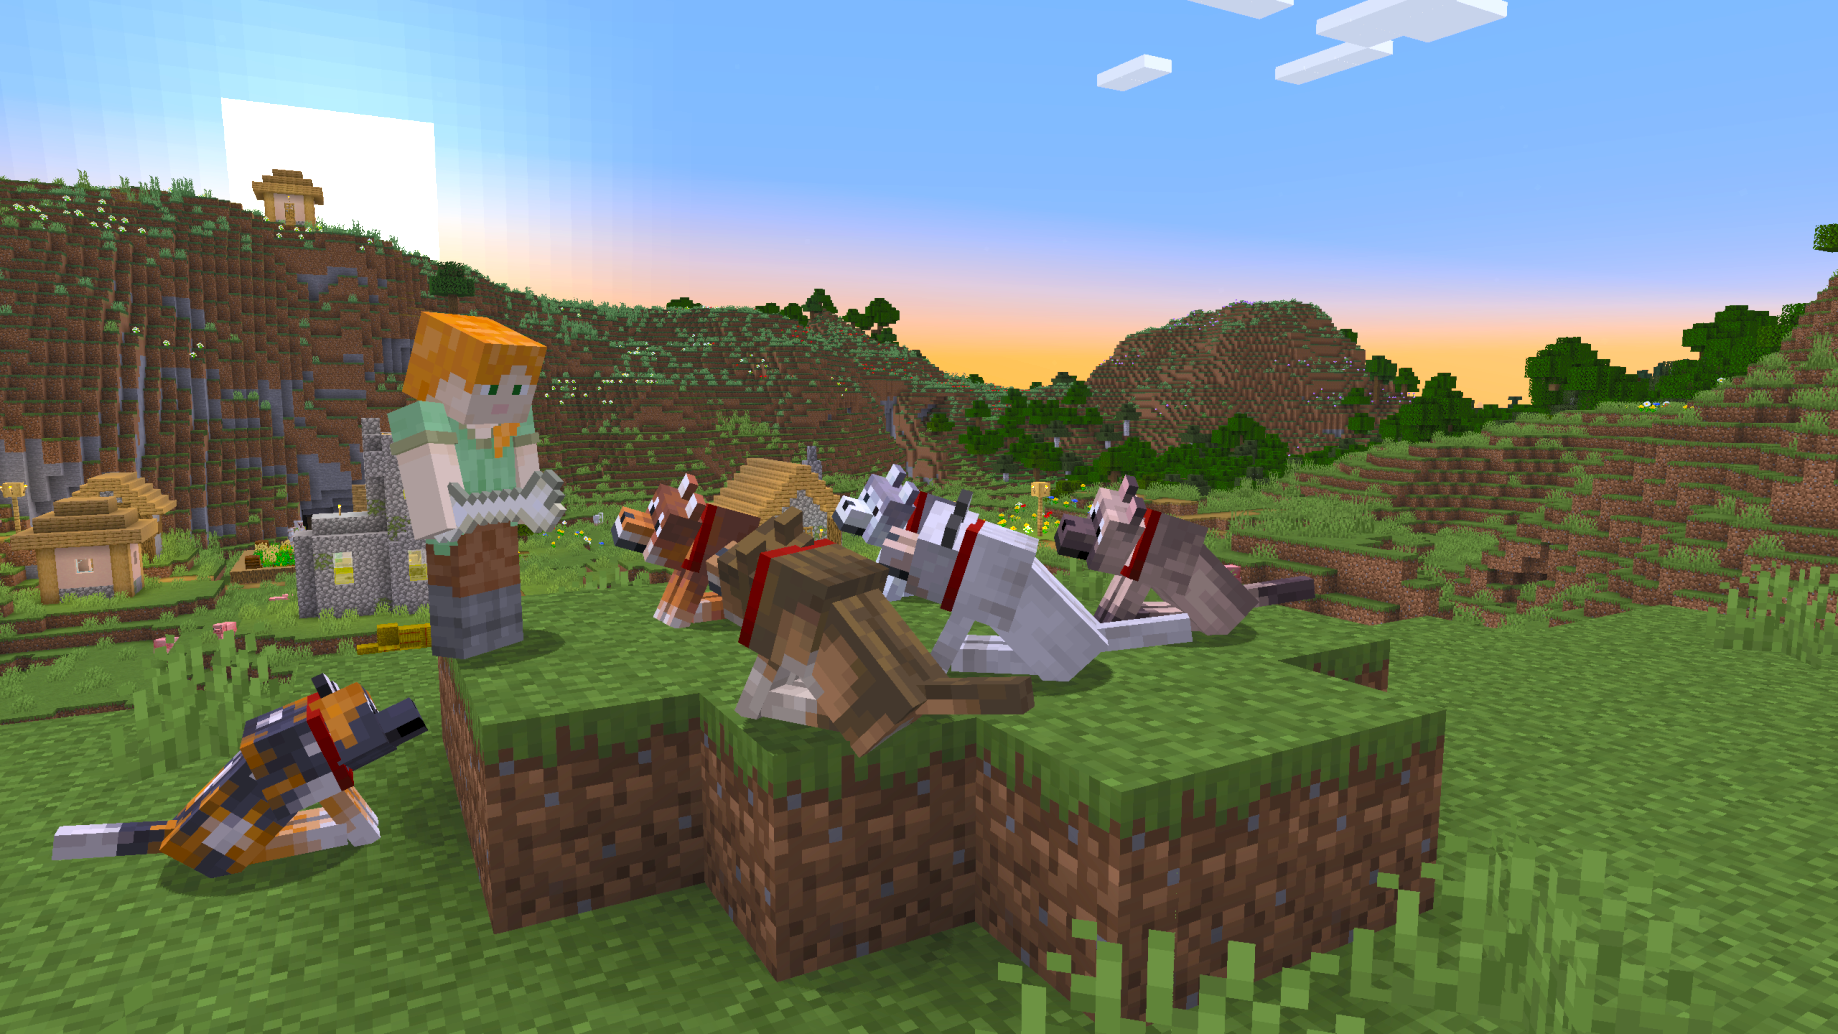 Animated Minecraft characters working on a farm with animals and crops, relating to virtual economies